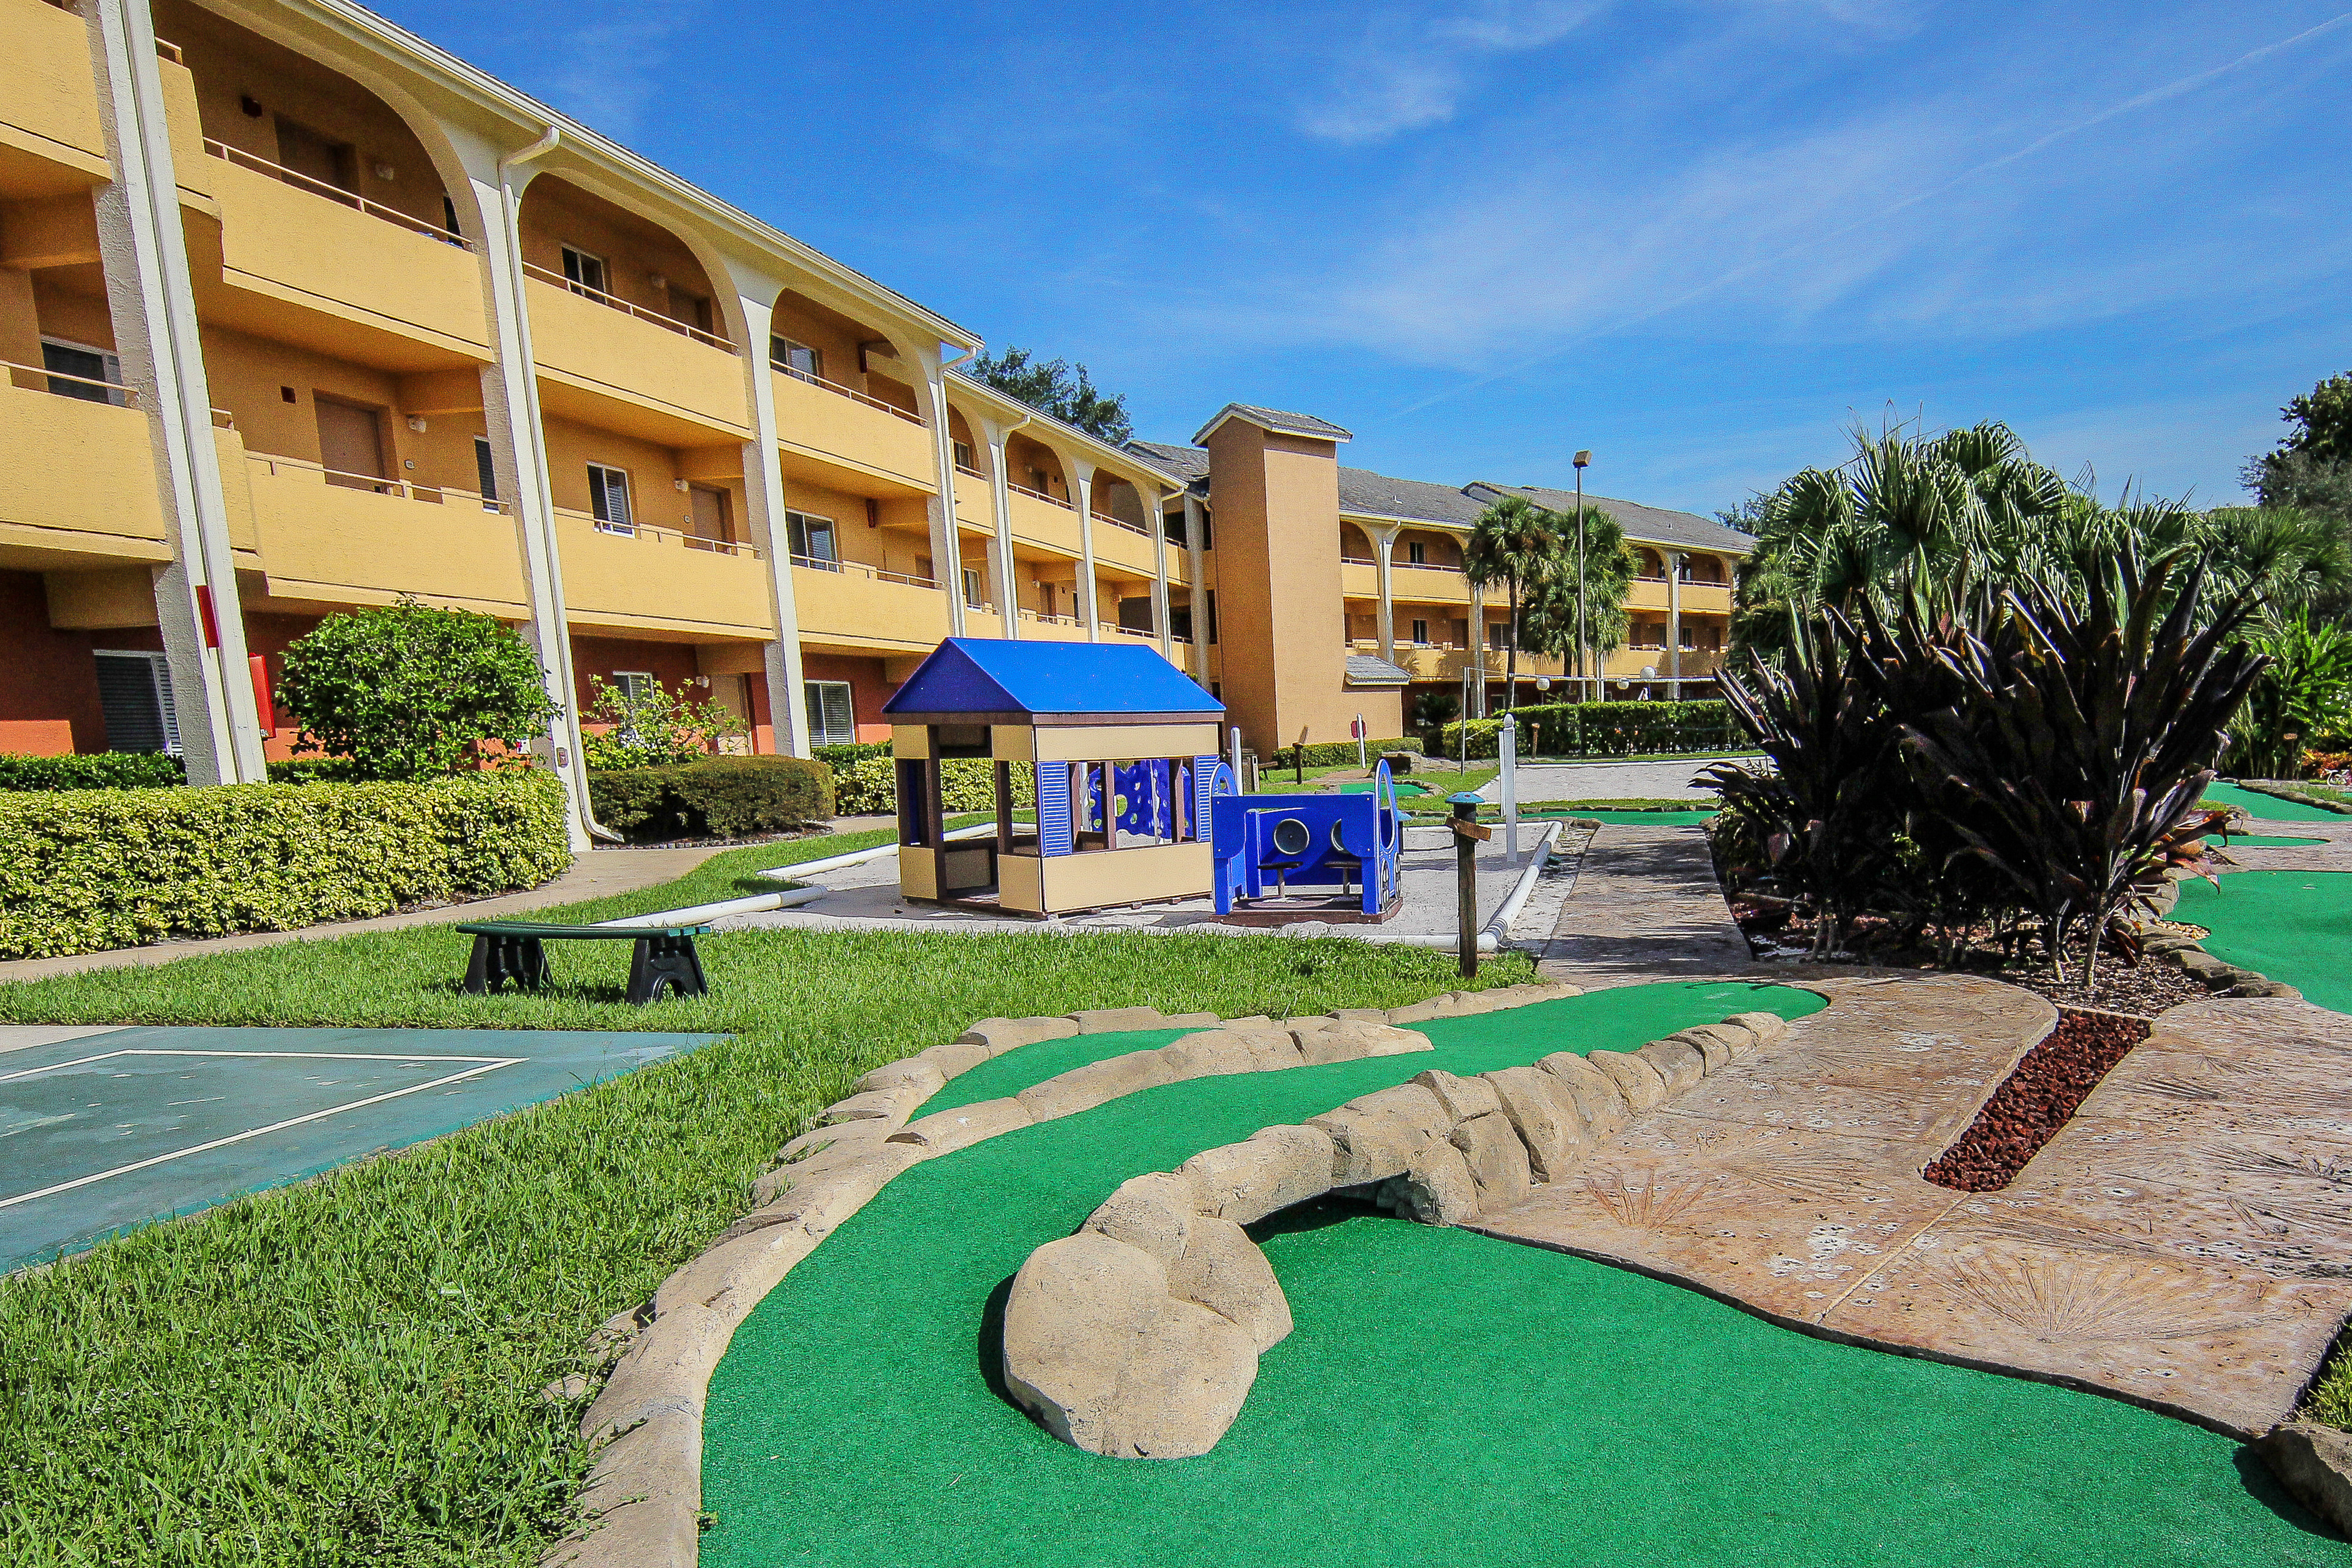 Mini Golf Course with Playground in background | Westgate Leisure Resort